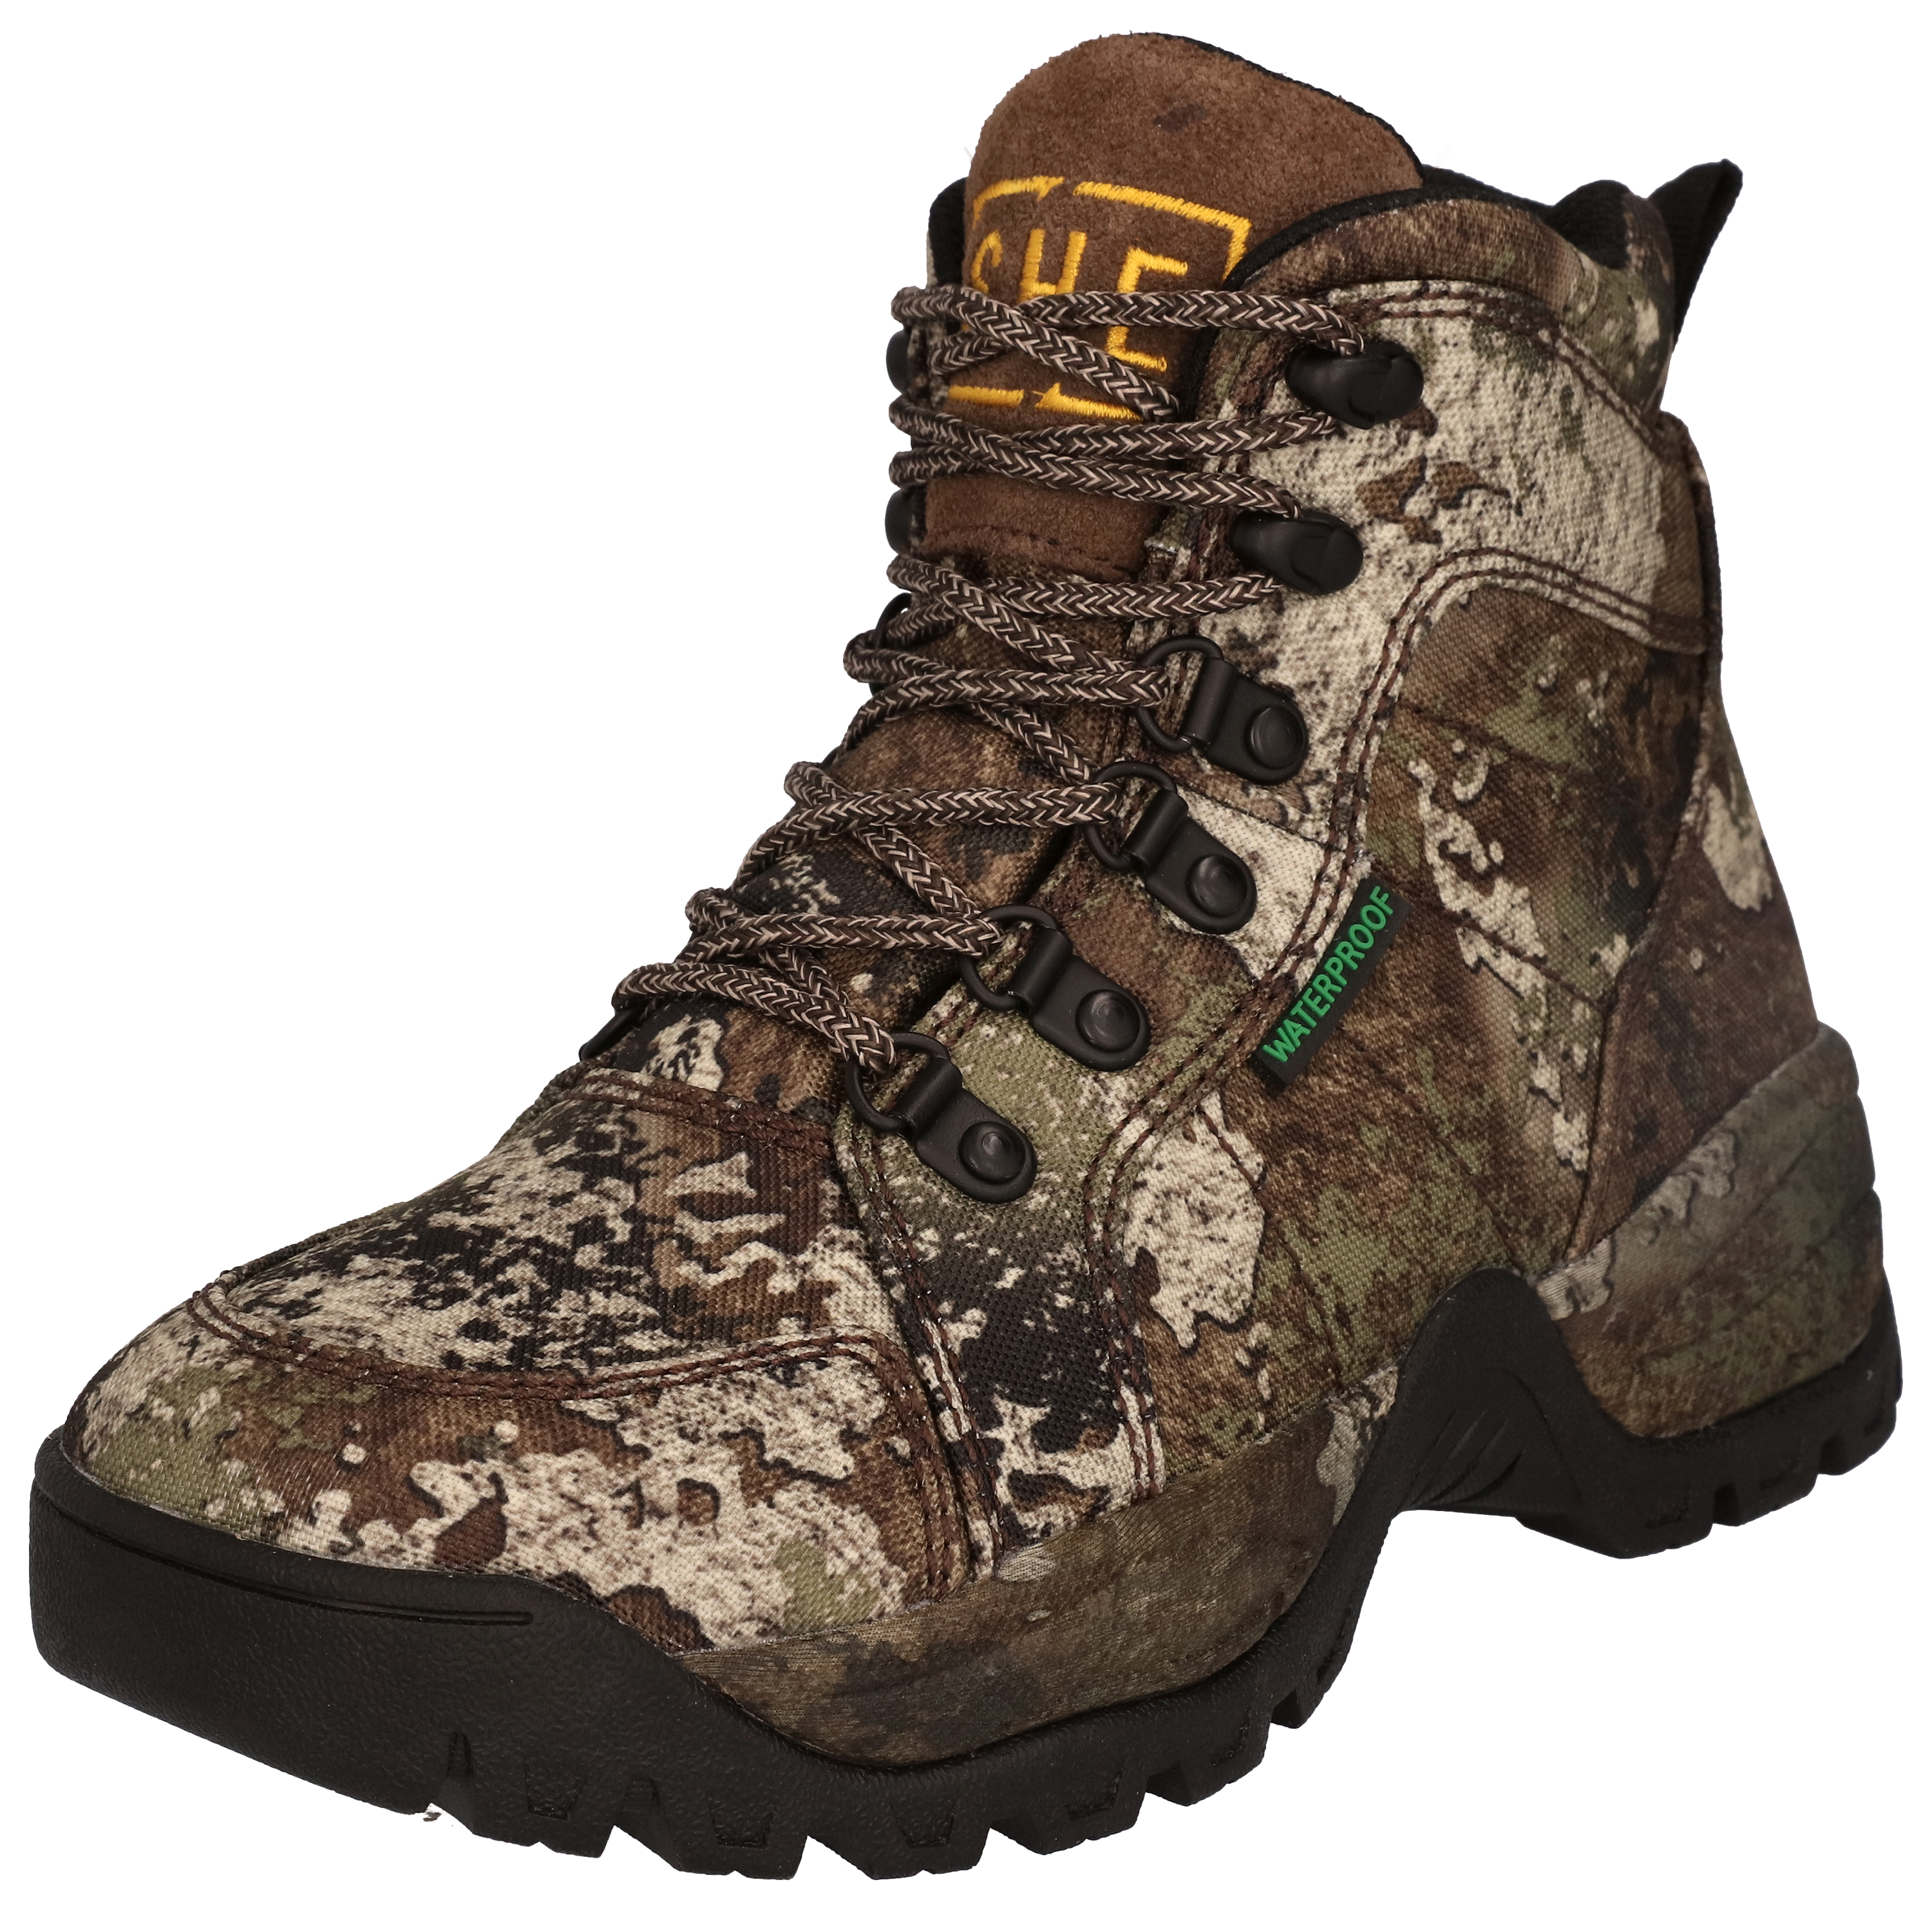 SHE Outdoor Timber Buck Waterproof Hunting Boots for Ladies - TrueTimber Strata - 9.5M